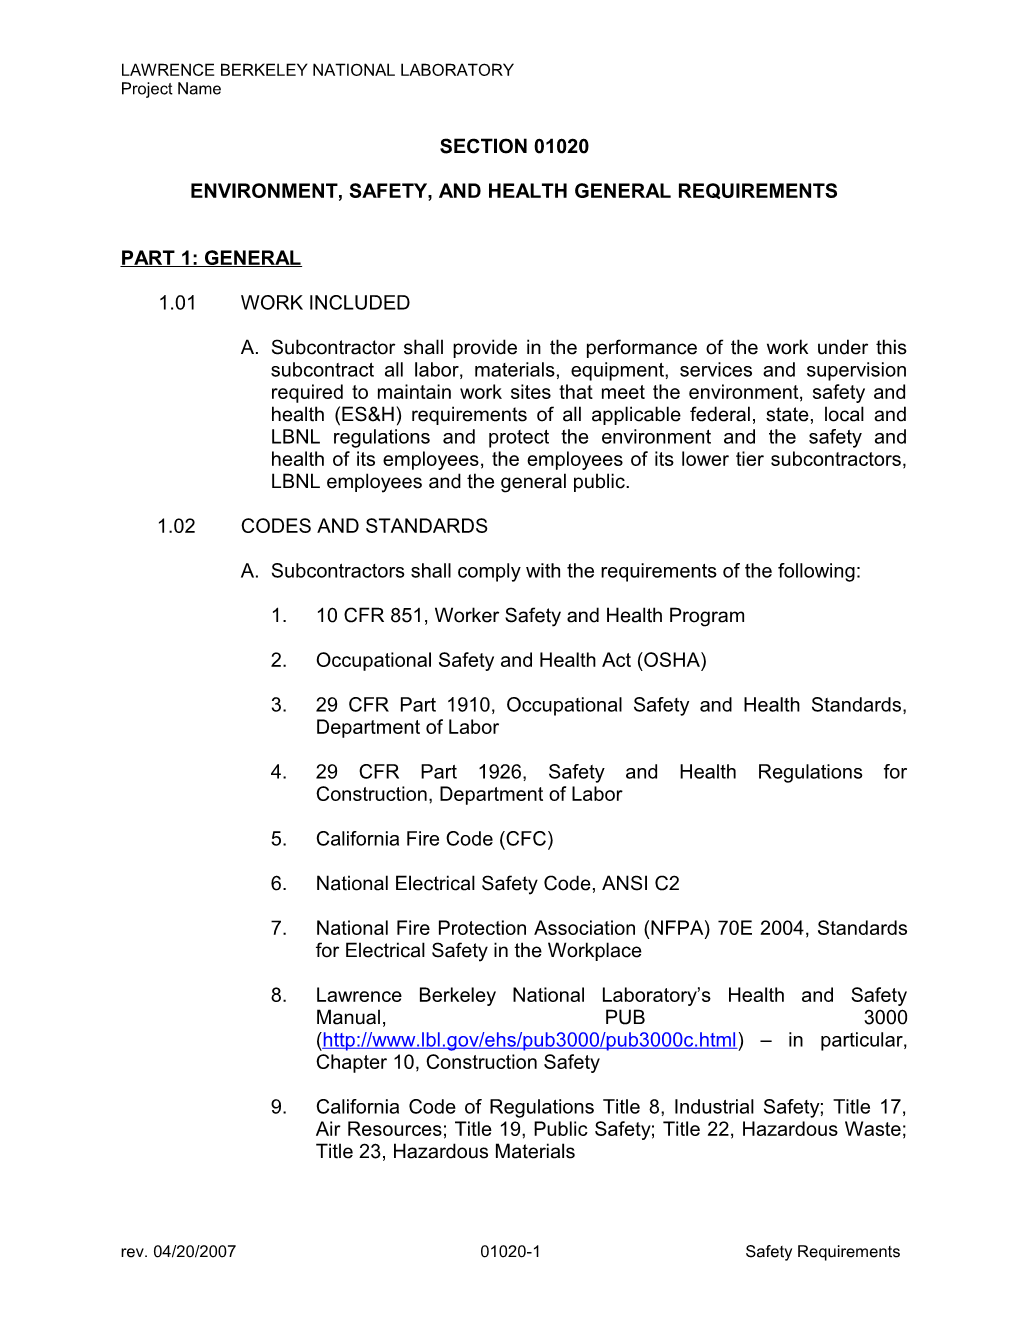 ENVIRONMENT, Safety, and HEALTH General REQUIREMENTS